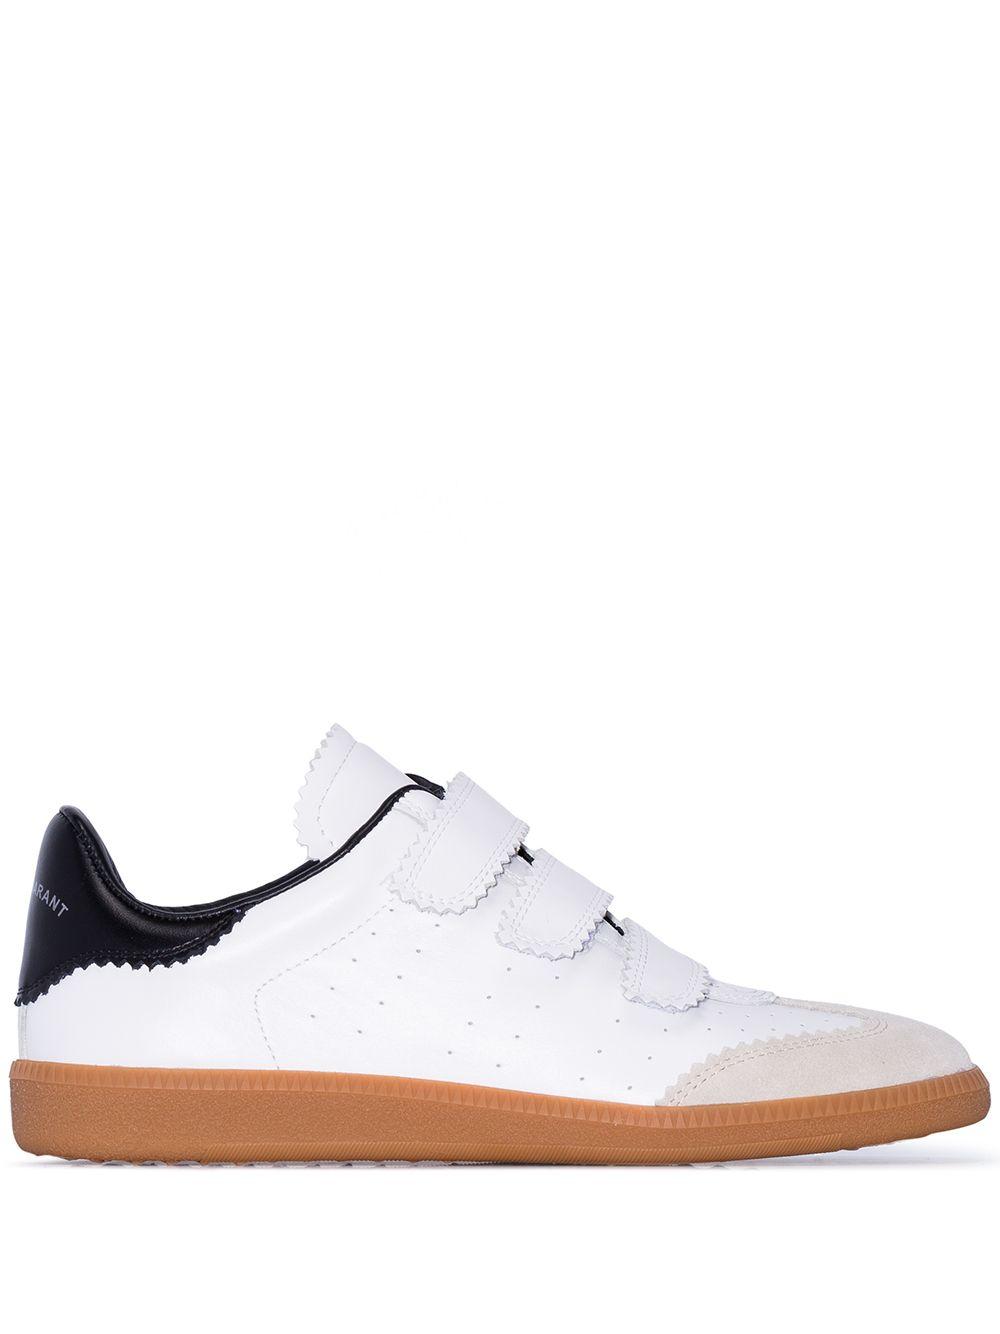 Isabel Marant Leather Beth Three-strap Sneakers in White - Save 61% - Lyst